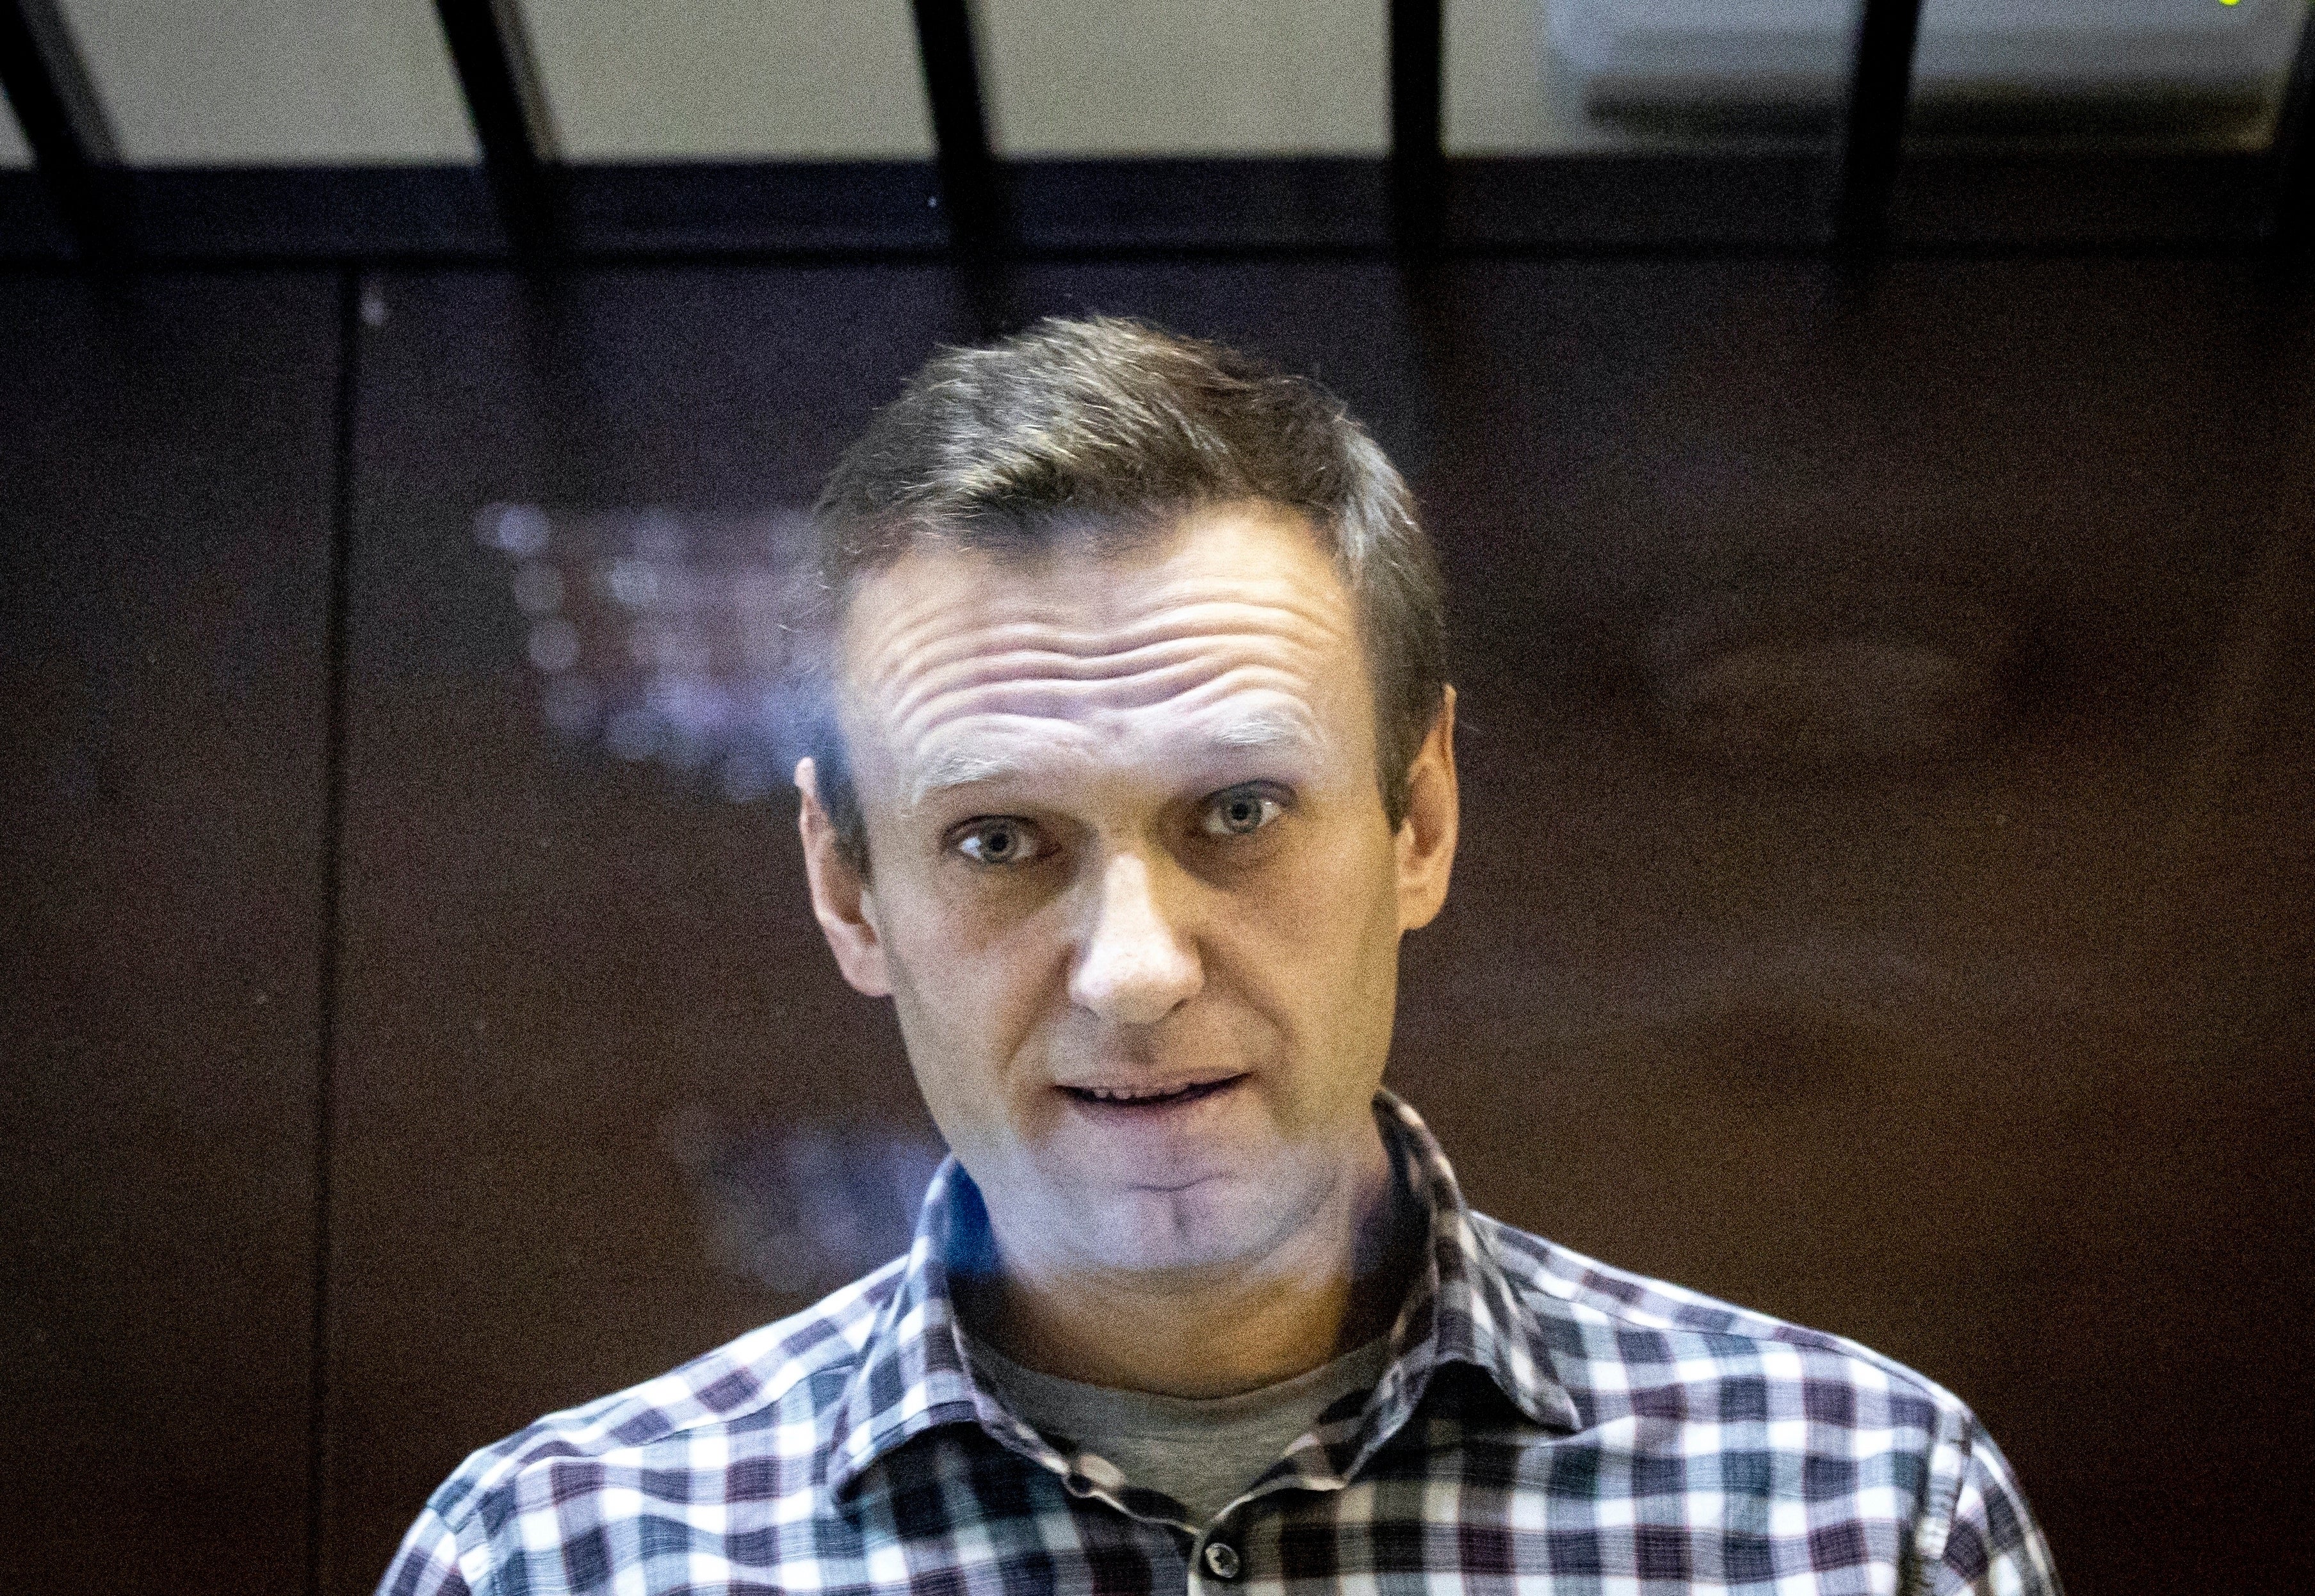 Jailed opposition leader, Alexei Navalny, in Moscow in February